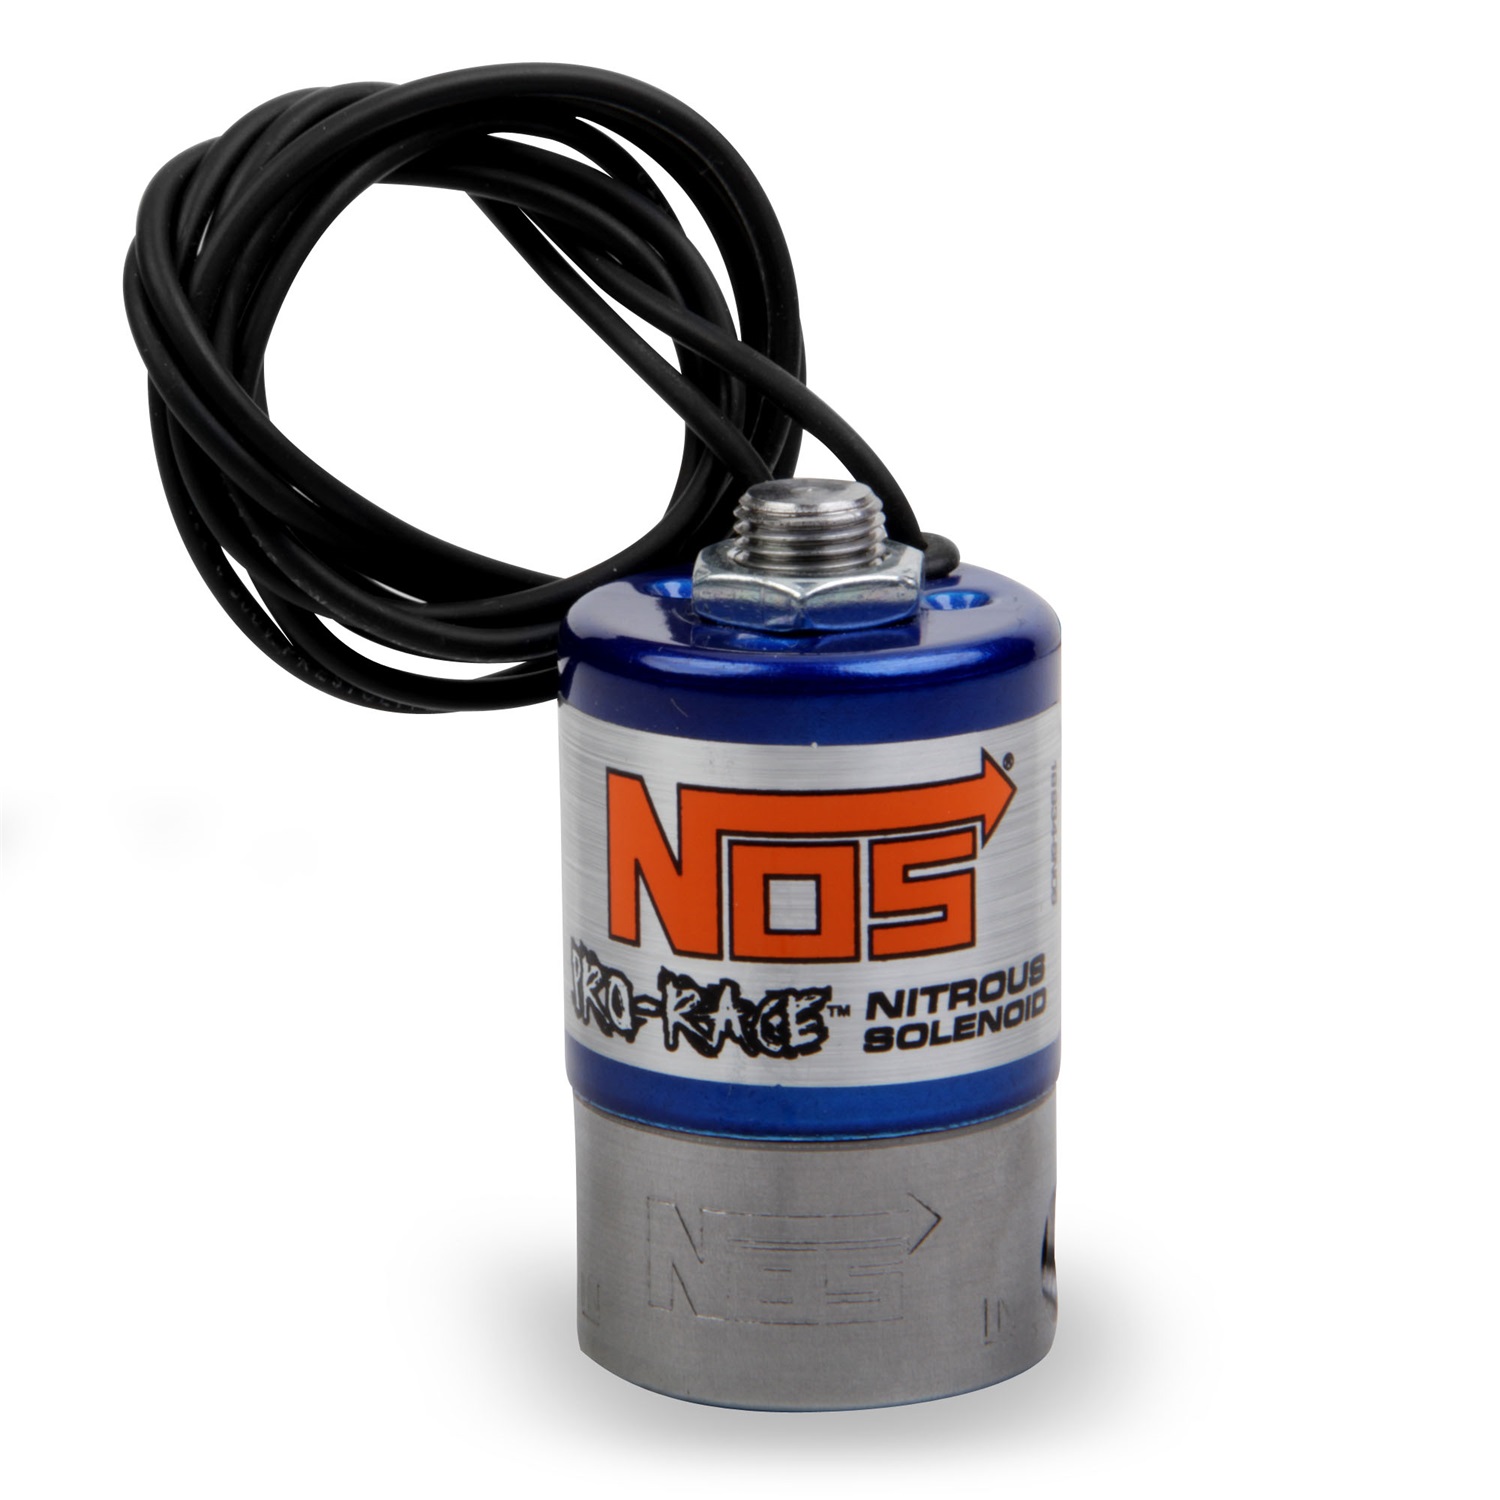 Nitrous Oxide Solenoid, NOS Solenoids and parts, PRO RACE SOLENOID N2O